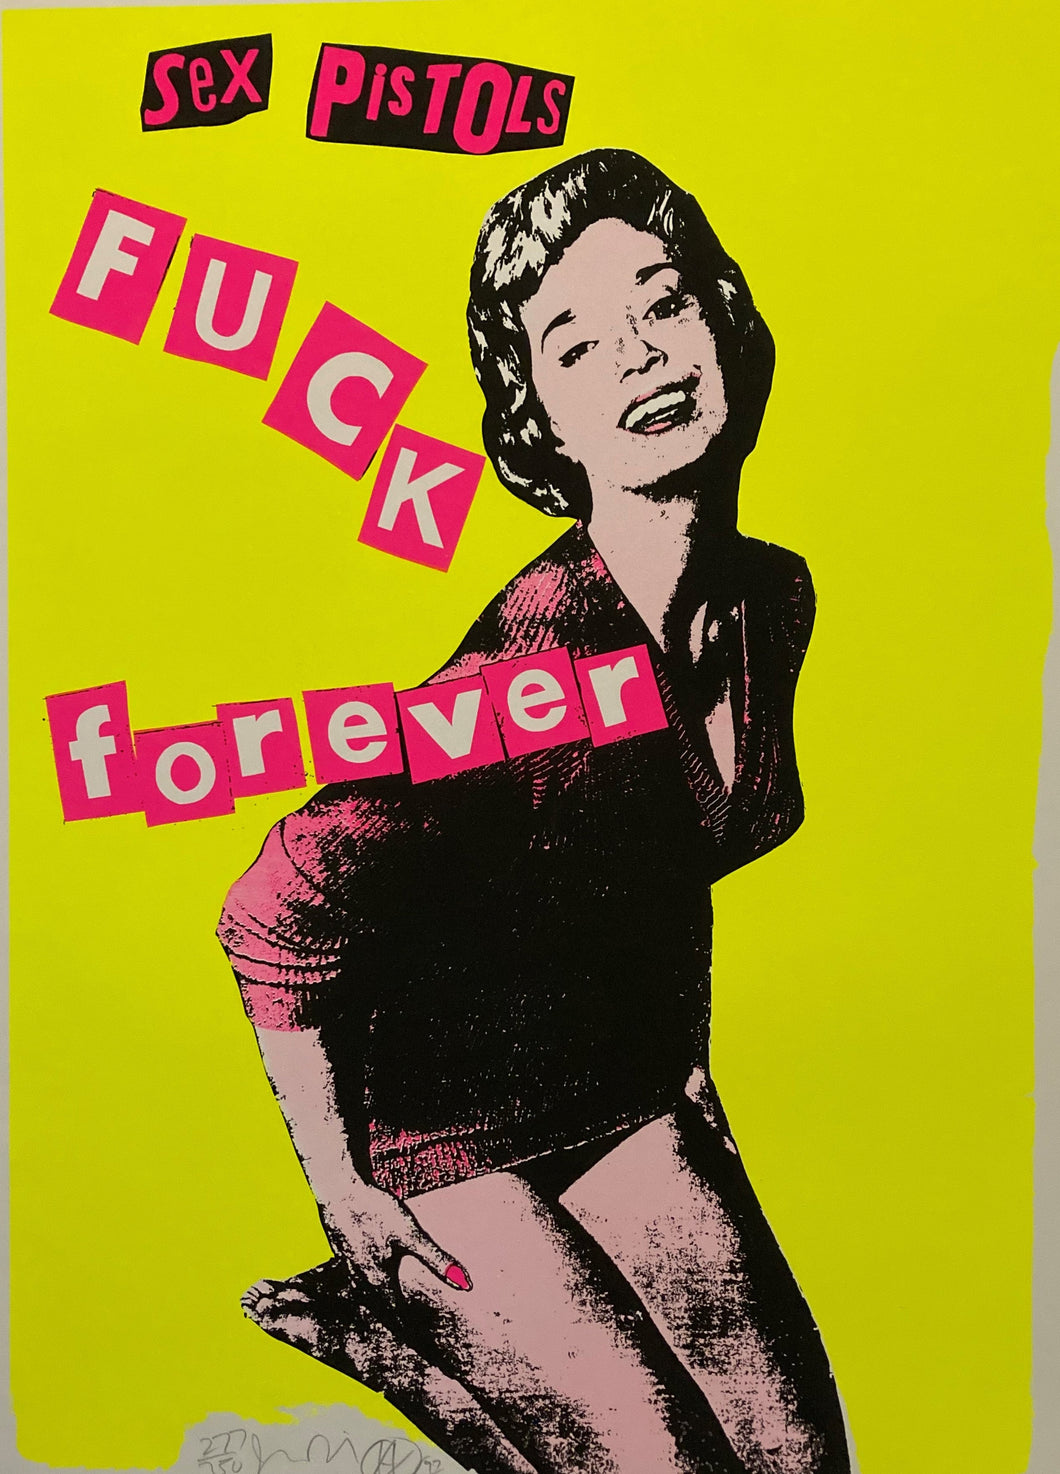 Sex Pistols original poster - Jamie Reid Screen Print Fuck Forever Yellow limited edition signed & numbered 97 - Original Music and Movie Posters for sale from Bamalama - Online Poster Store UK London